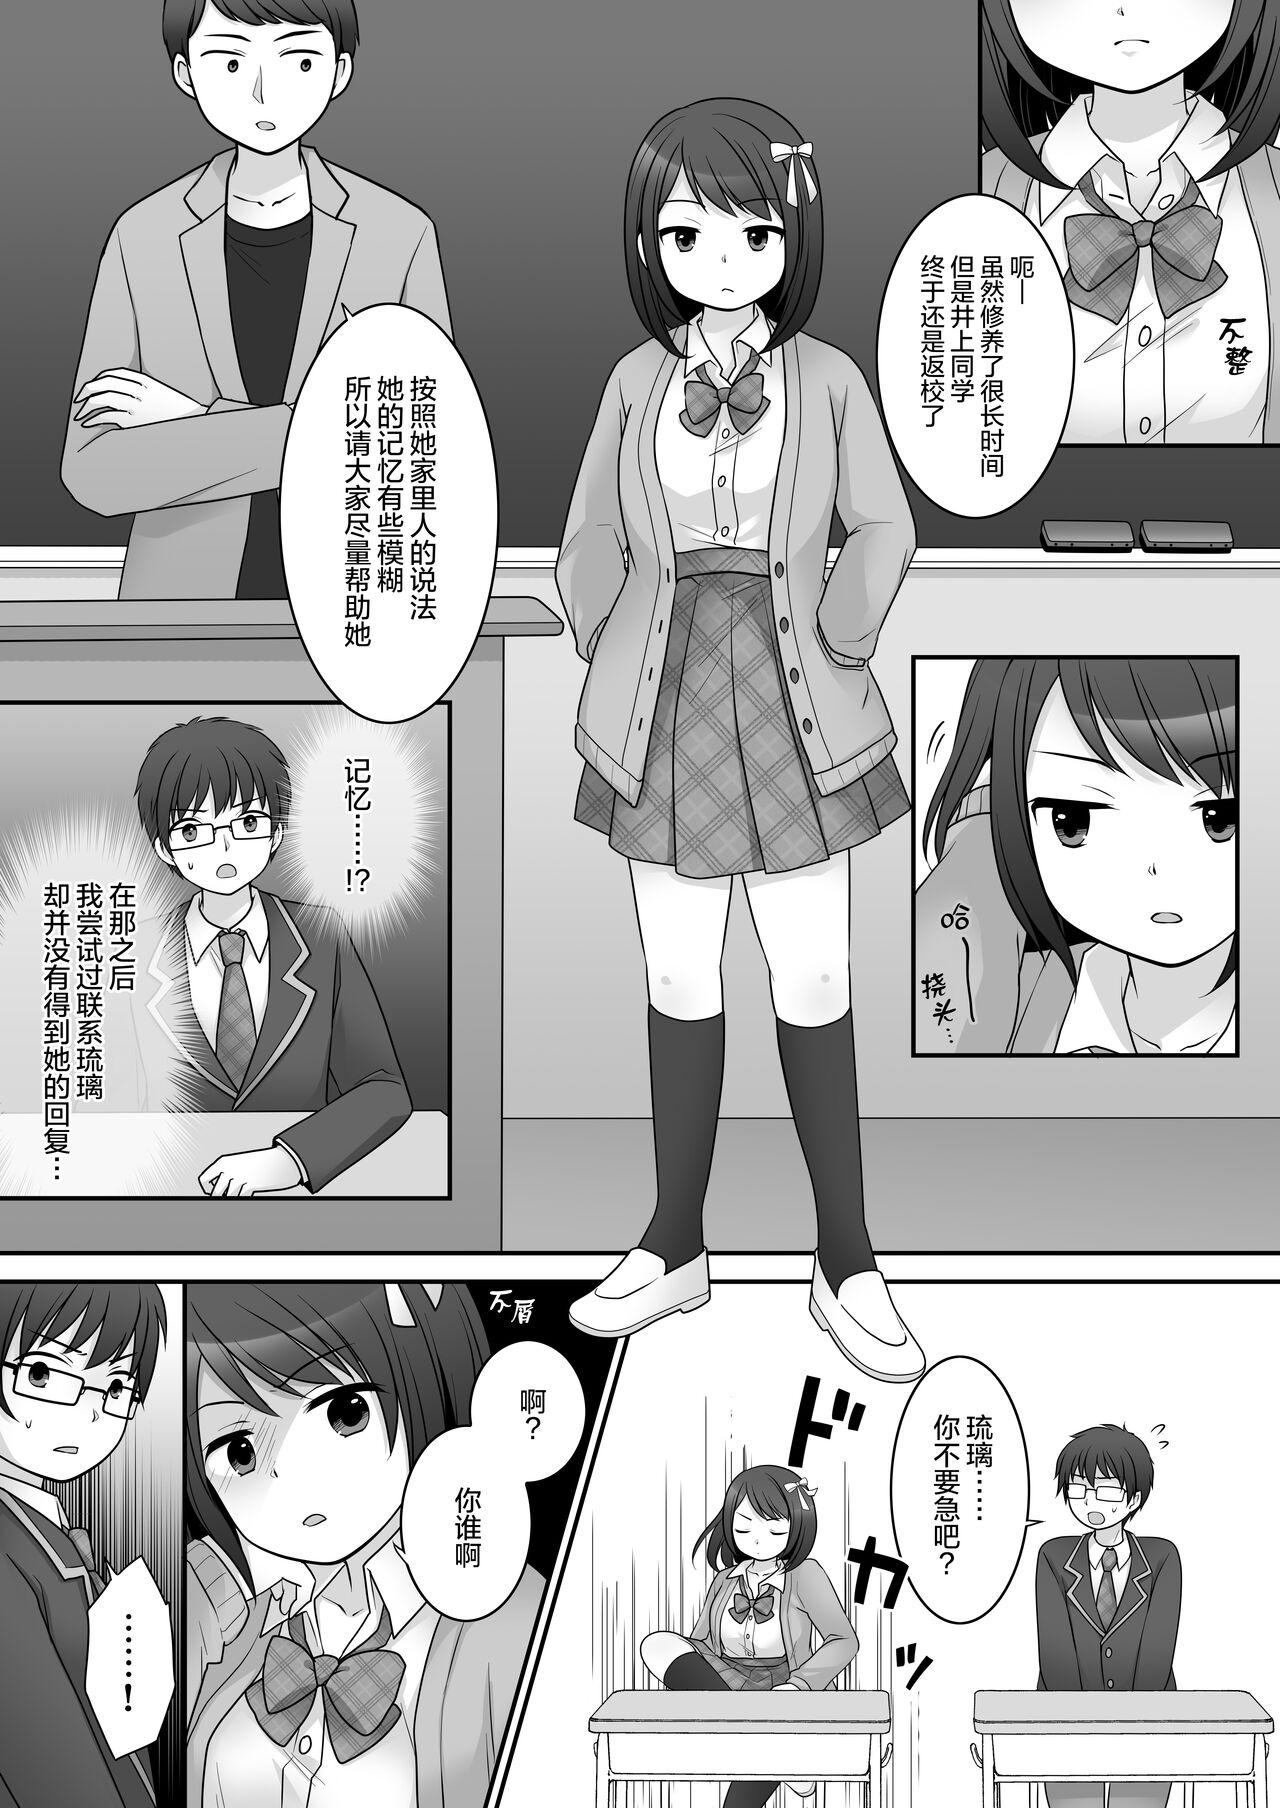 Leche Furyou in Kanojo - Original Face - Page 8